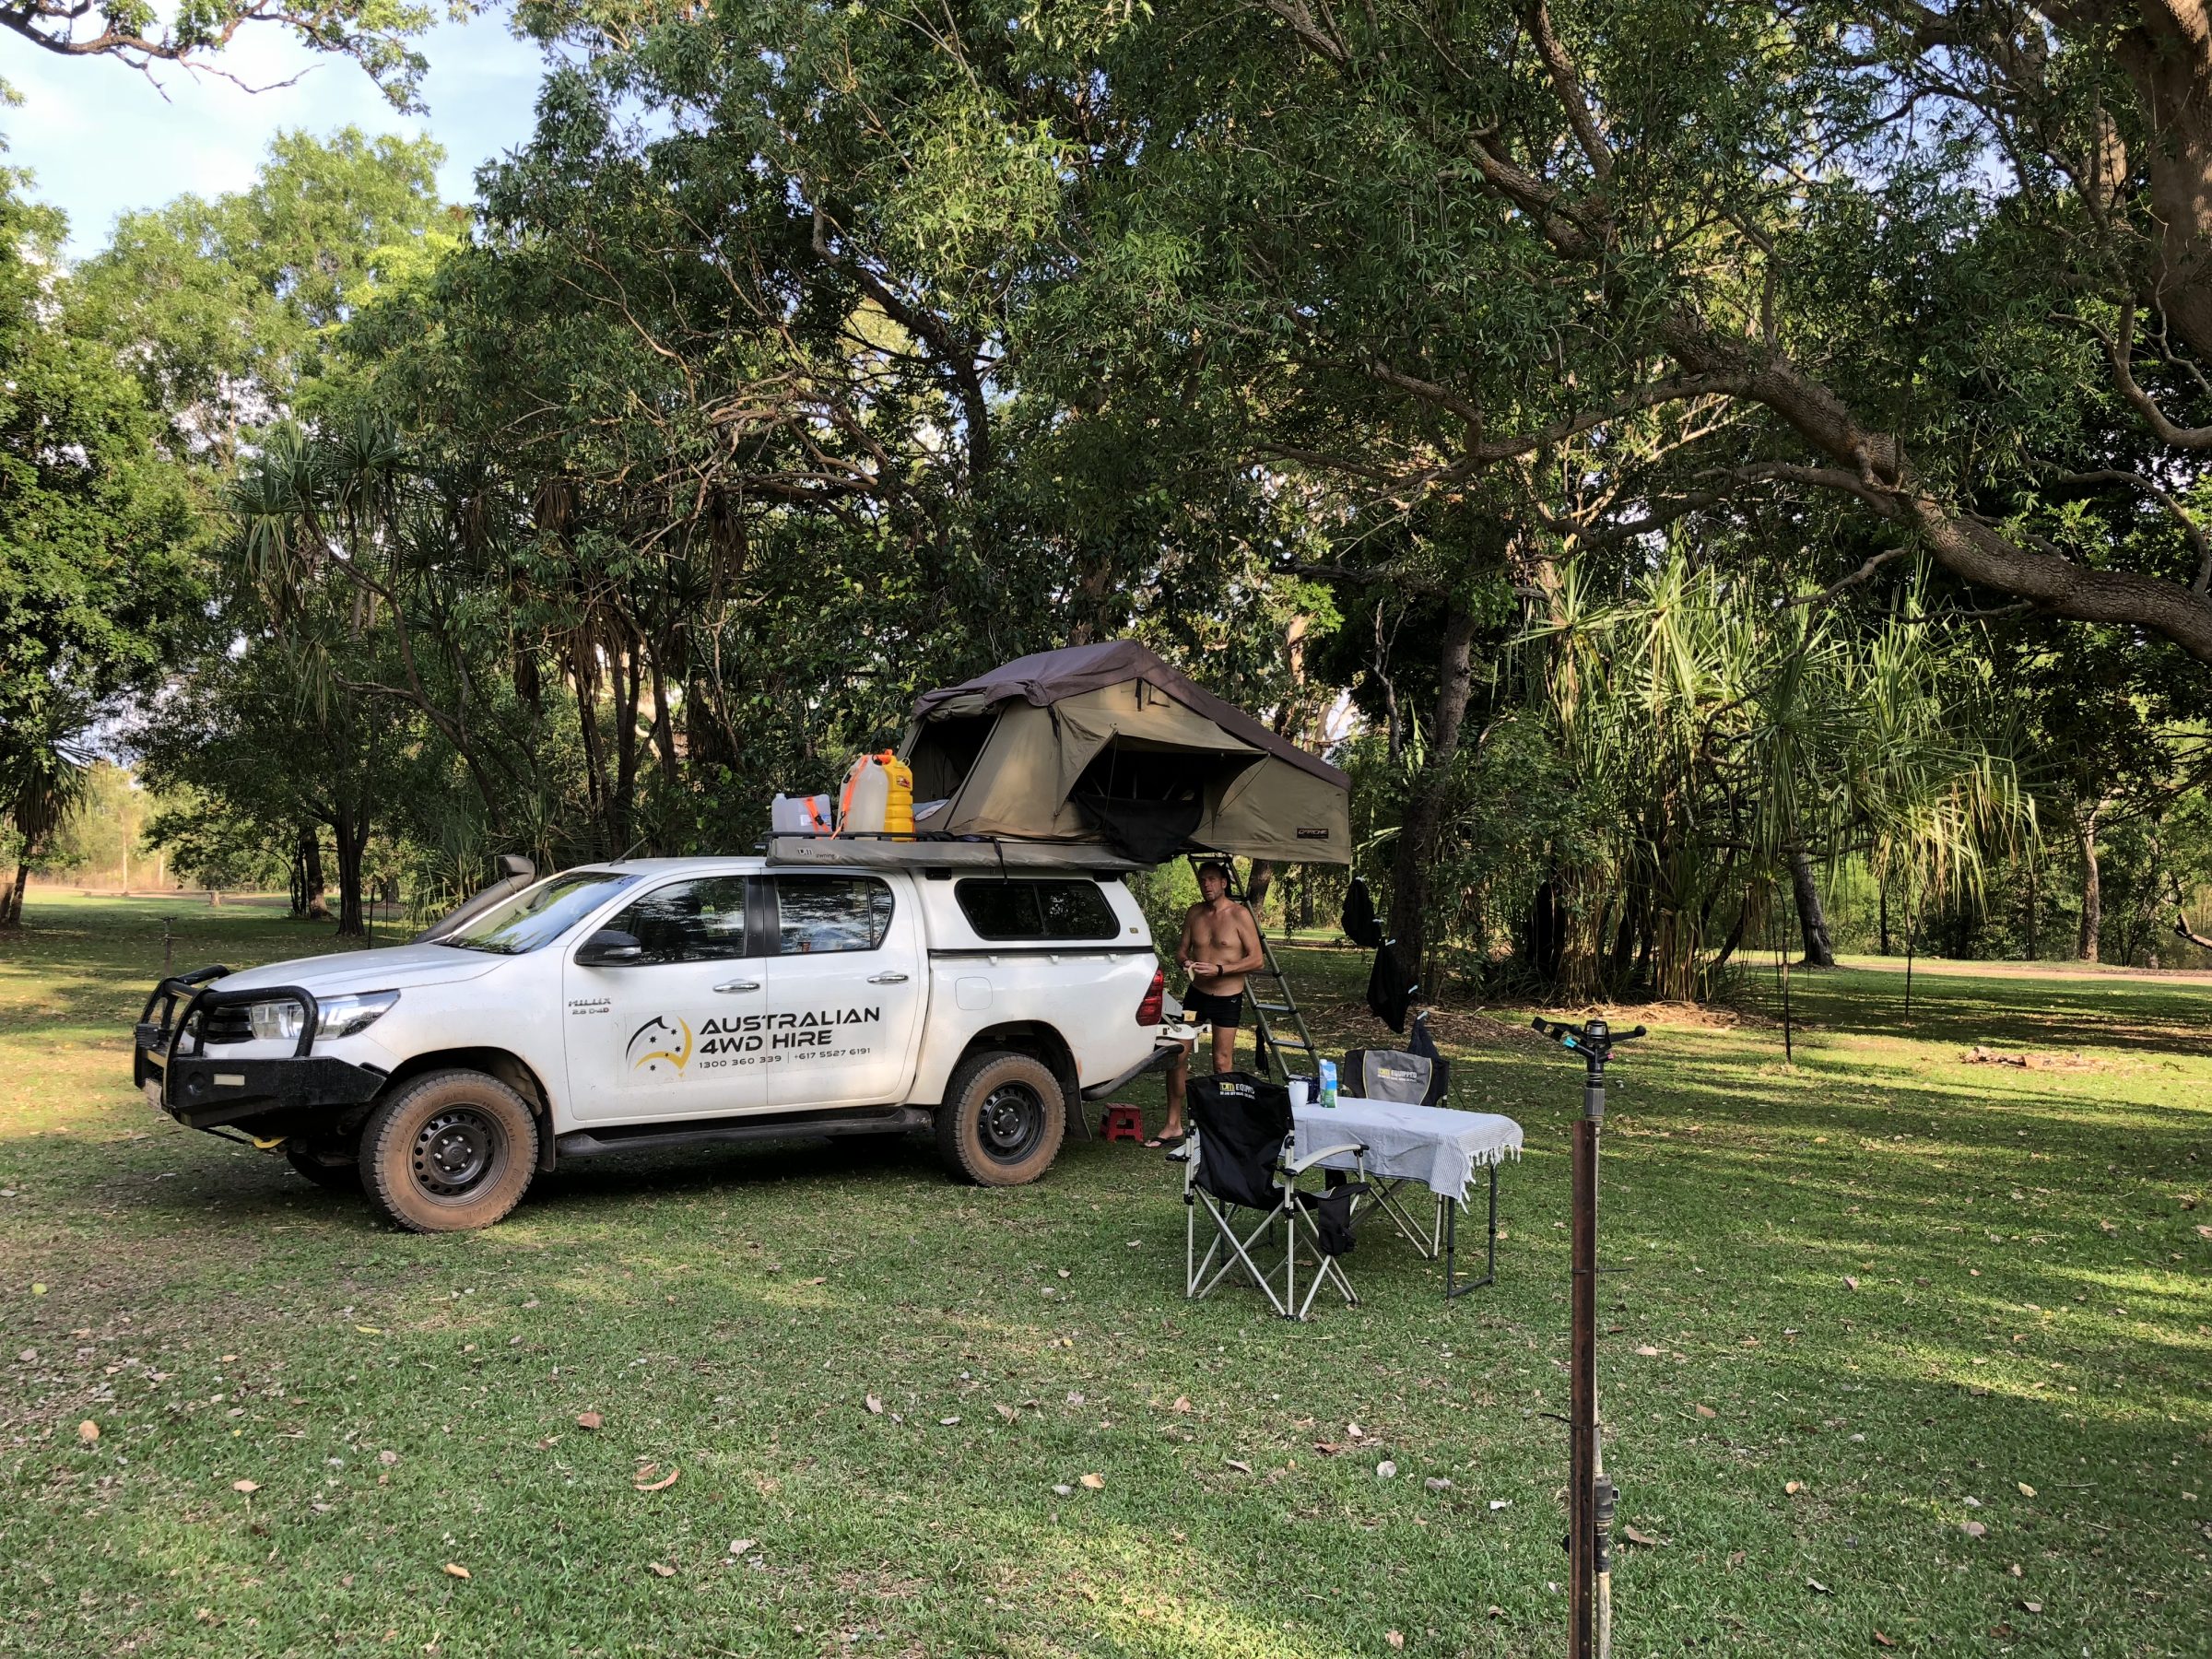 The rented Toyota 4x4 Hilux with roof tent in Australia